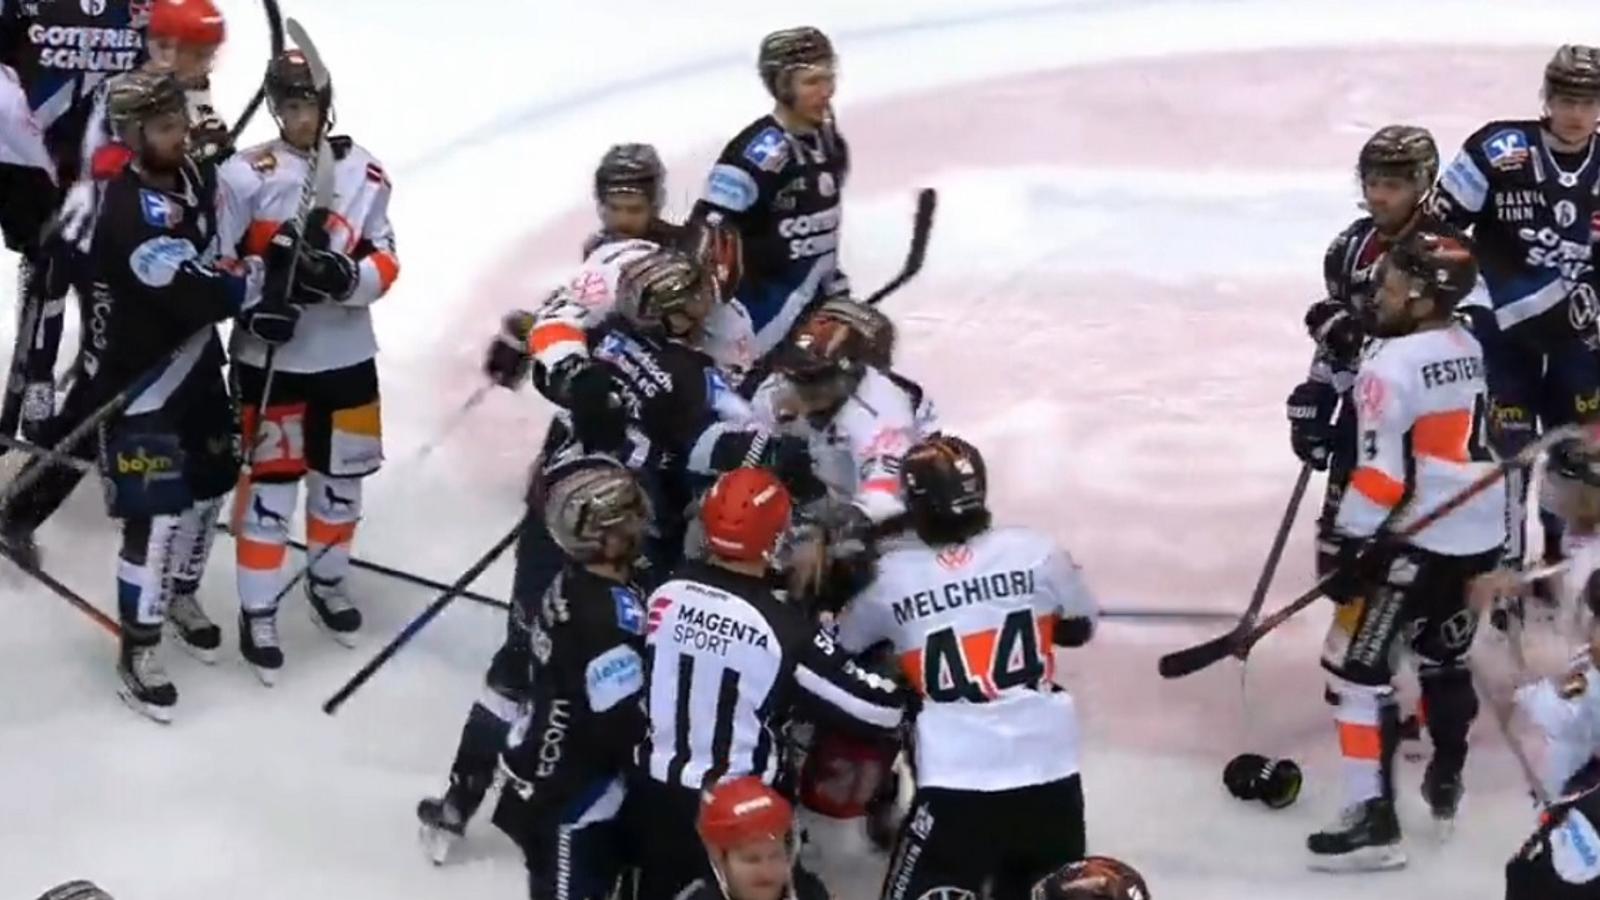 Handshake line turns into an all out brawl.